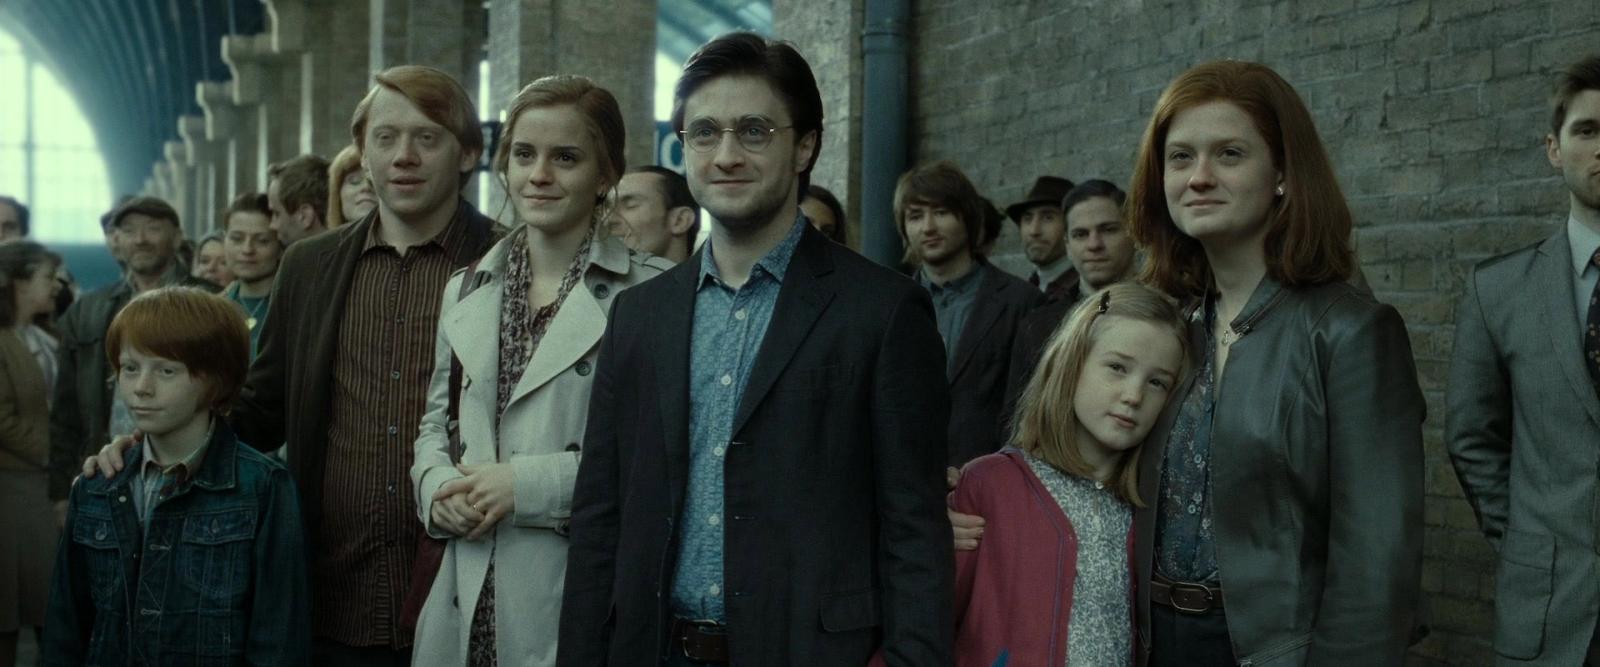 The 8 Most Overrated Moments in the Harry Potter Series - image 2